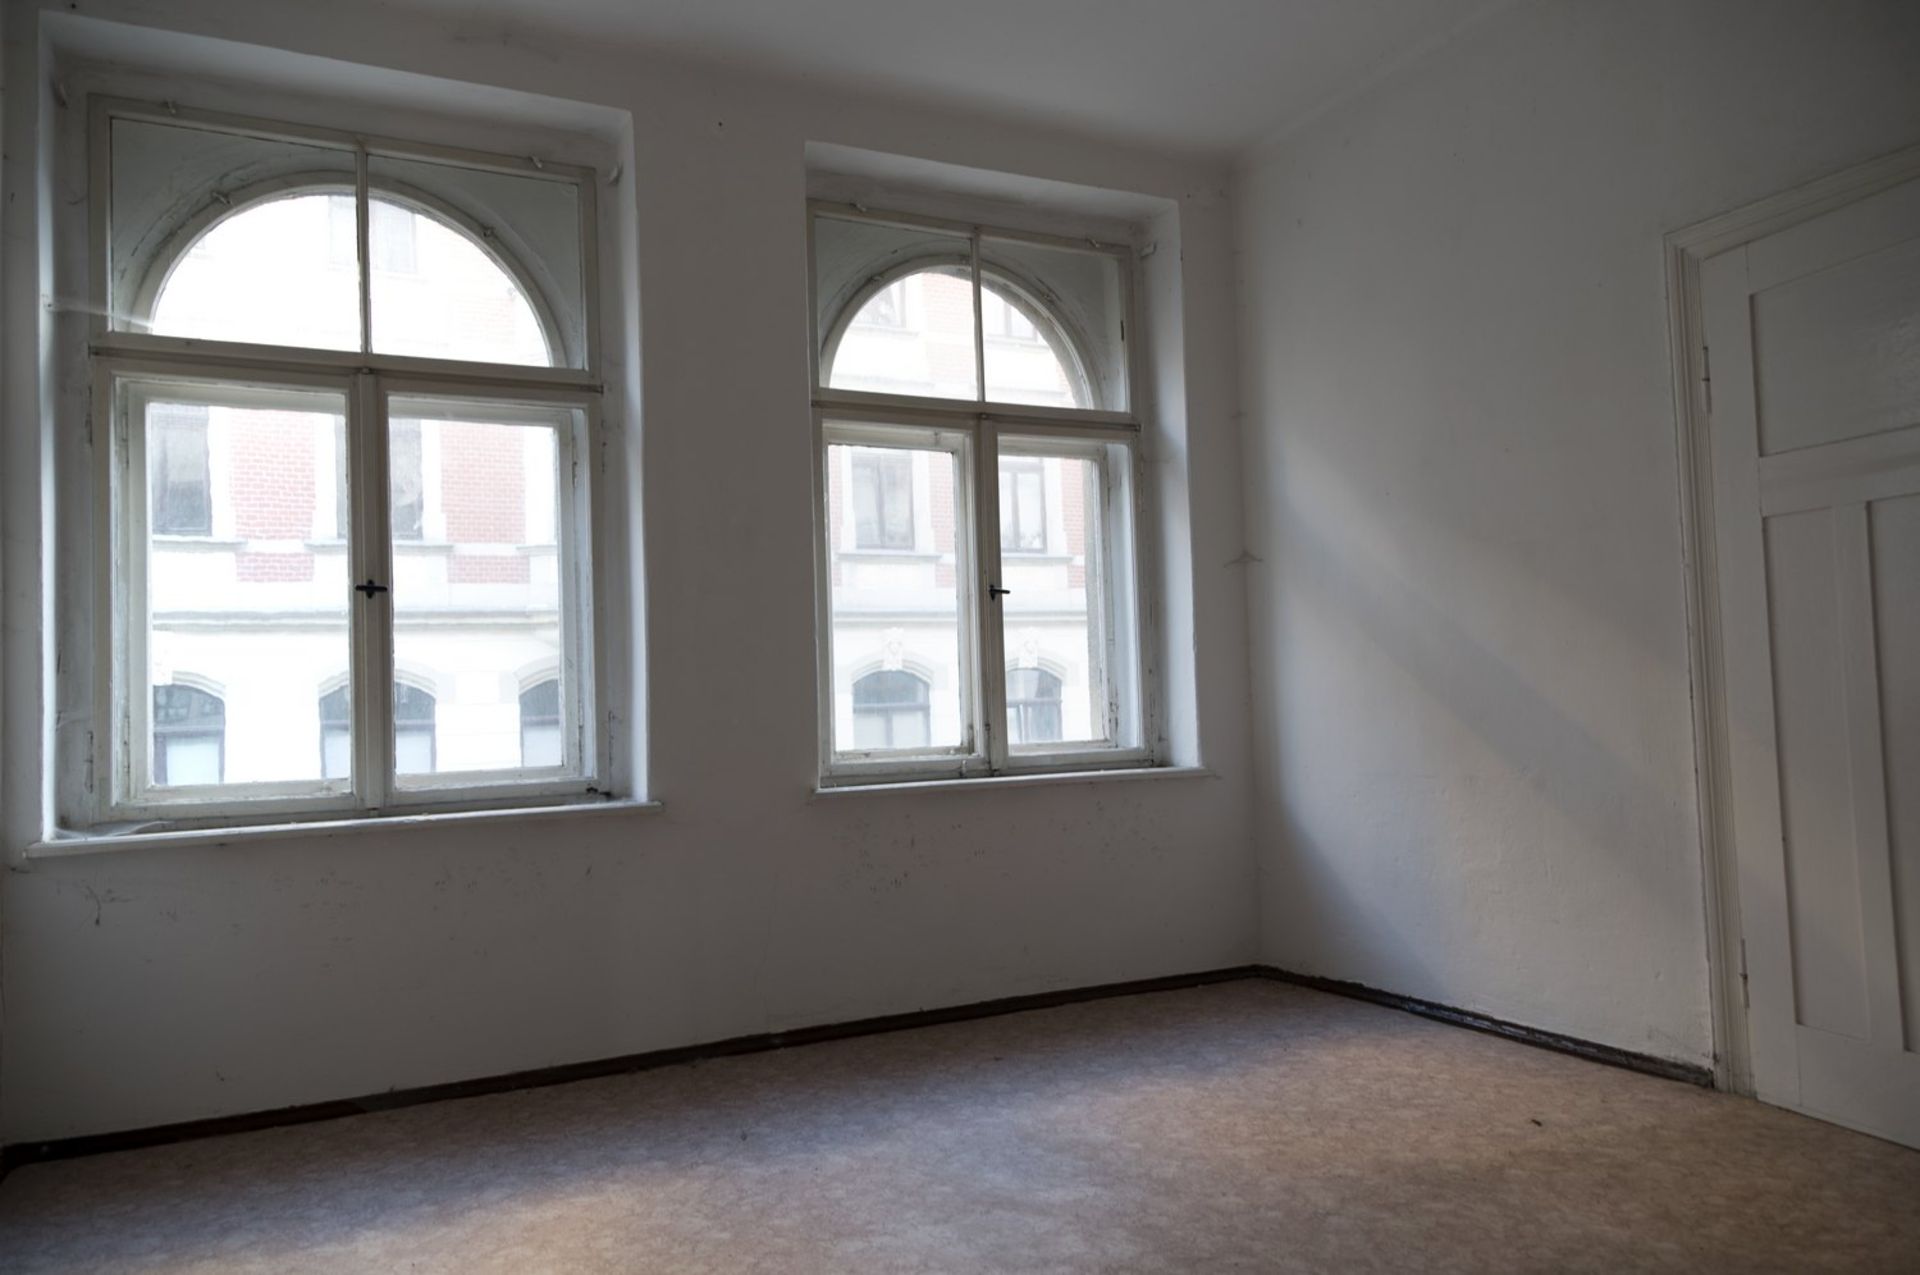 4 STOREY GERMANY APARTMENT BLOCK IN ADDITION TO A FULL BASEMENT + HUGE ATTIC! - Image 12 of 76